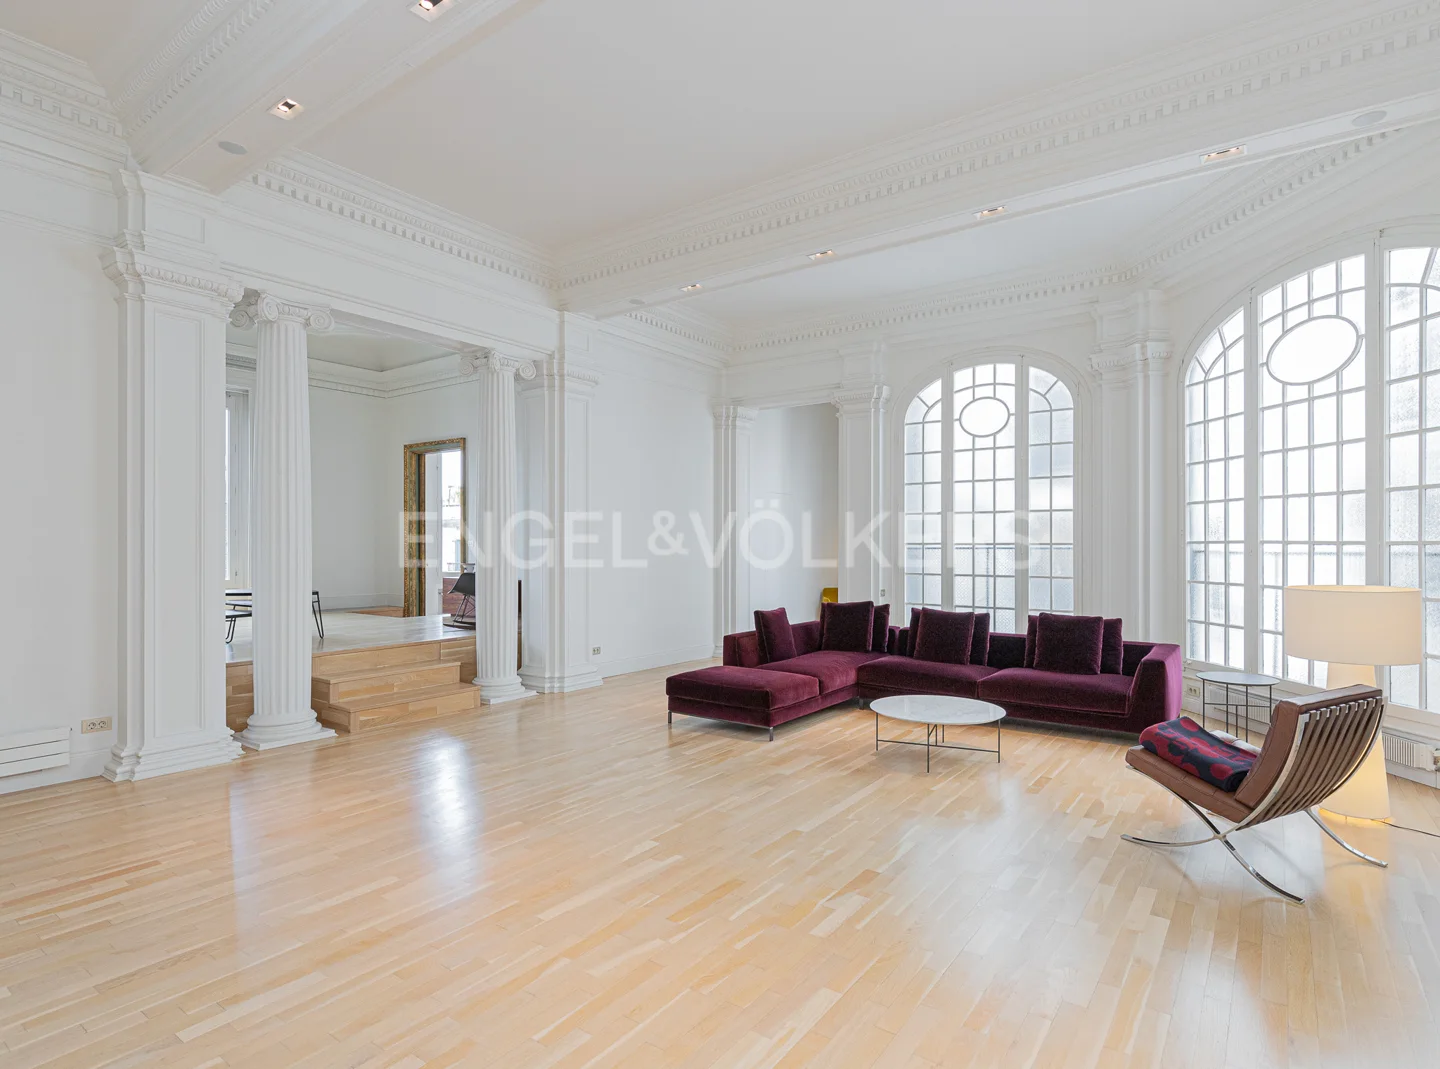 Spectacular refurbished flat in a historic building